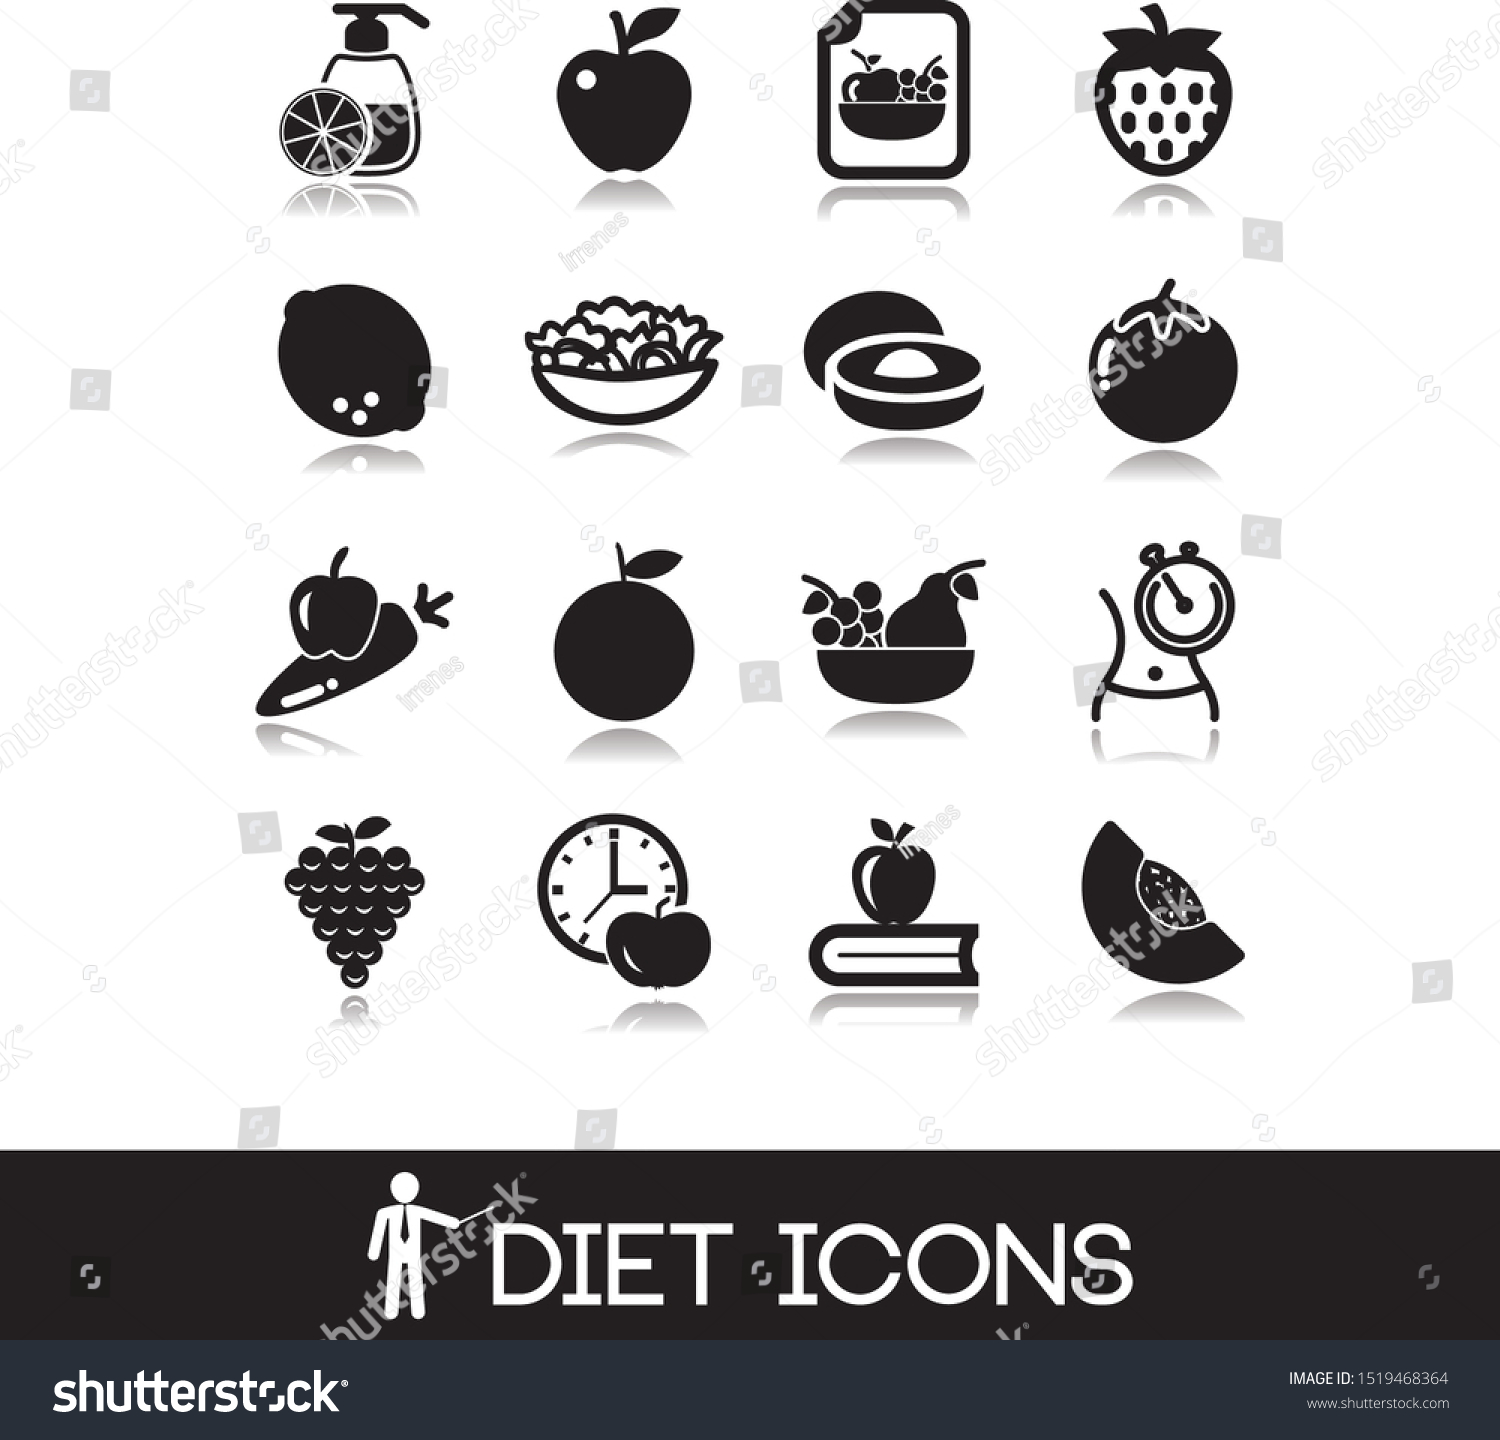 Nutrition Diet Icons Contain Symbols Healthy Stock Vector Royalty Free 1519468364 Shutterstock 2975